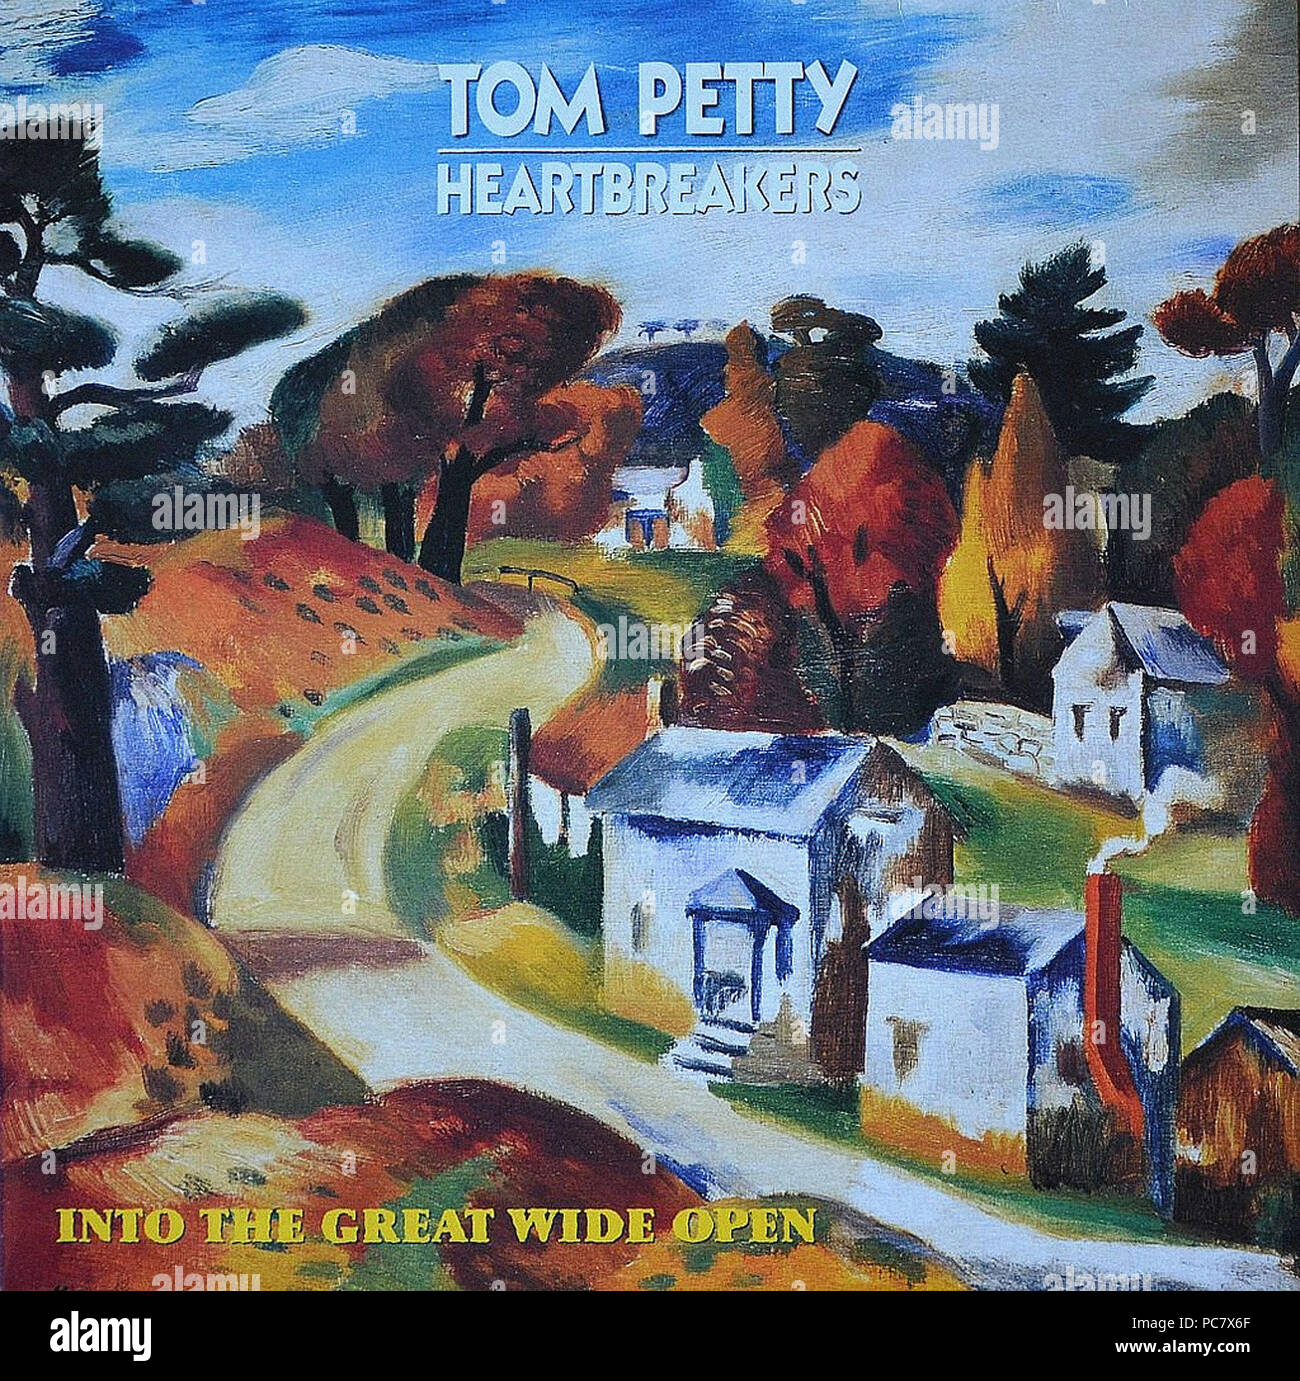 Tom Petty and The Heartbreakers   -  Into The Great Wide Open  -  Vintage vinyl album cover Stock Photo